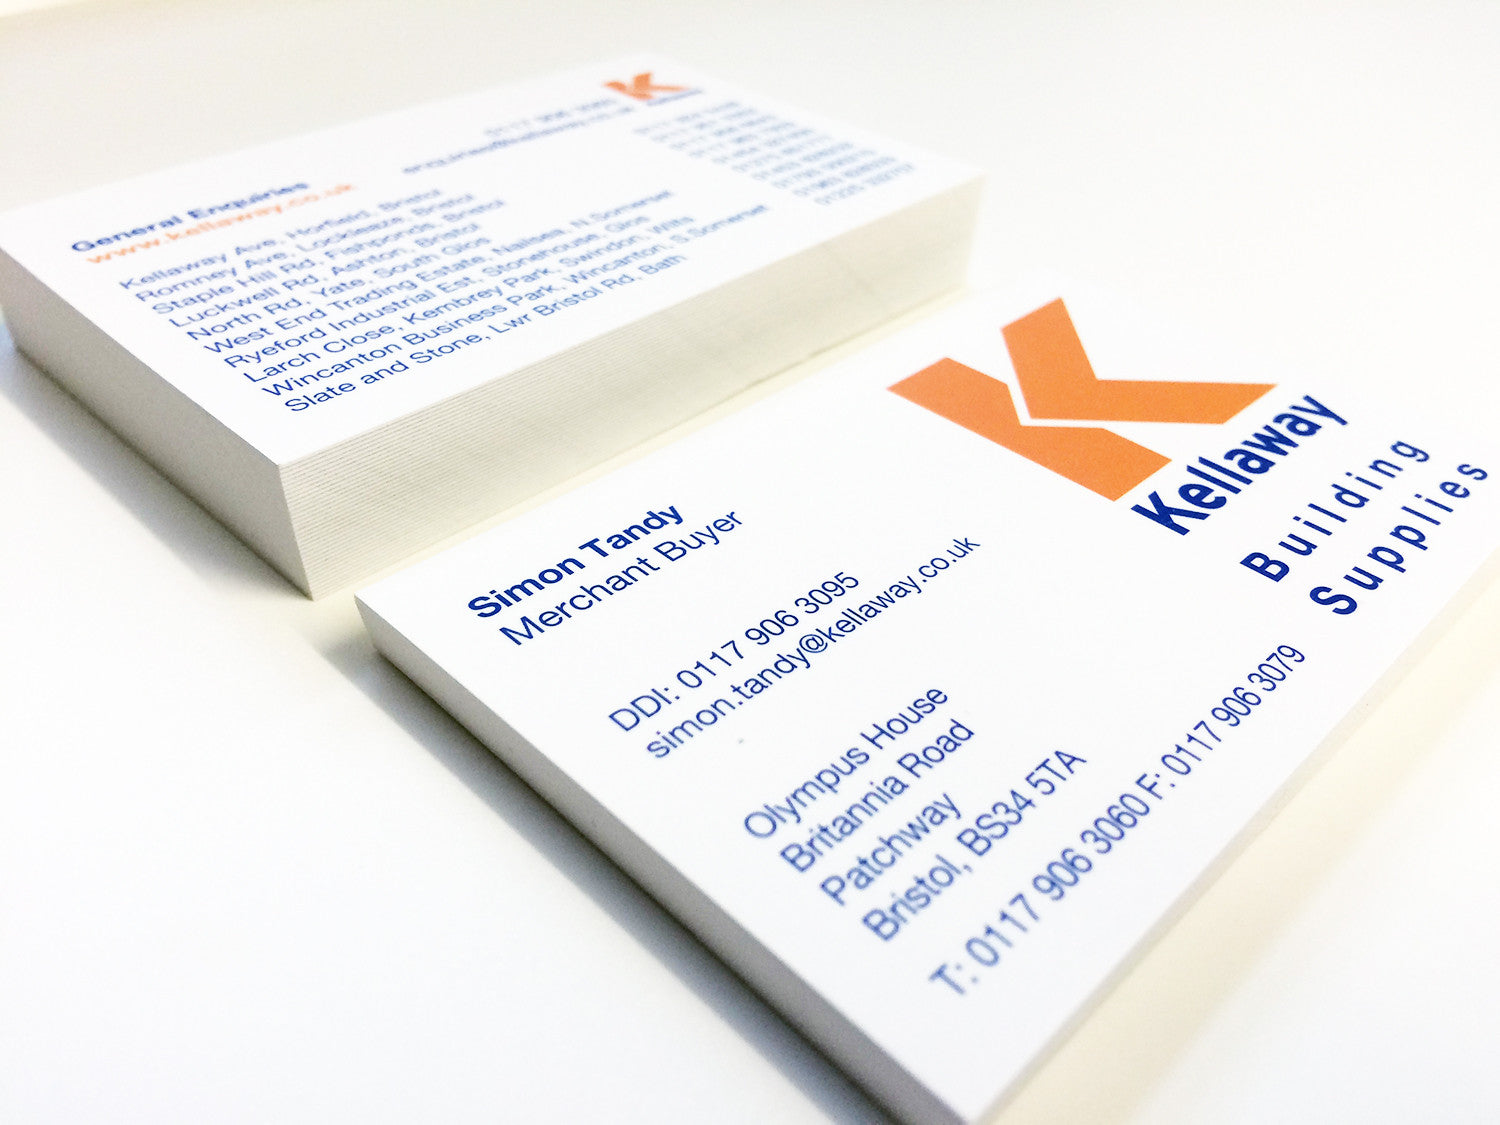 Next Day Business Cards